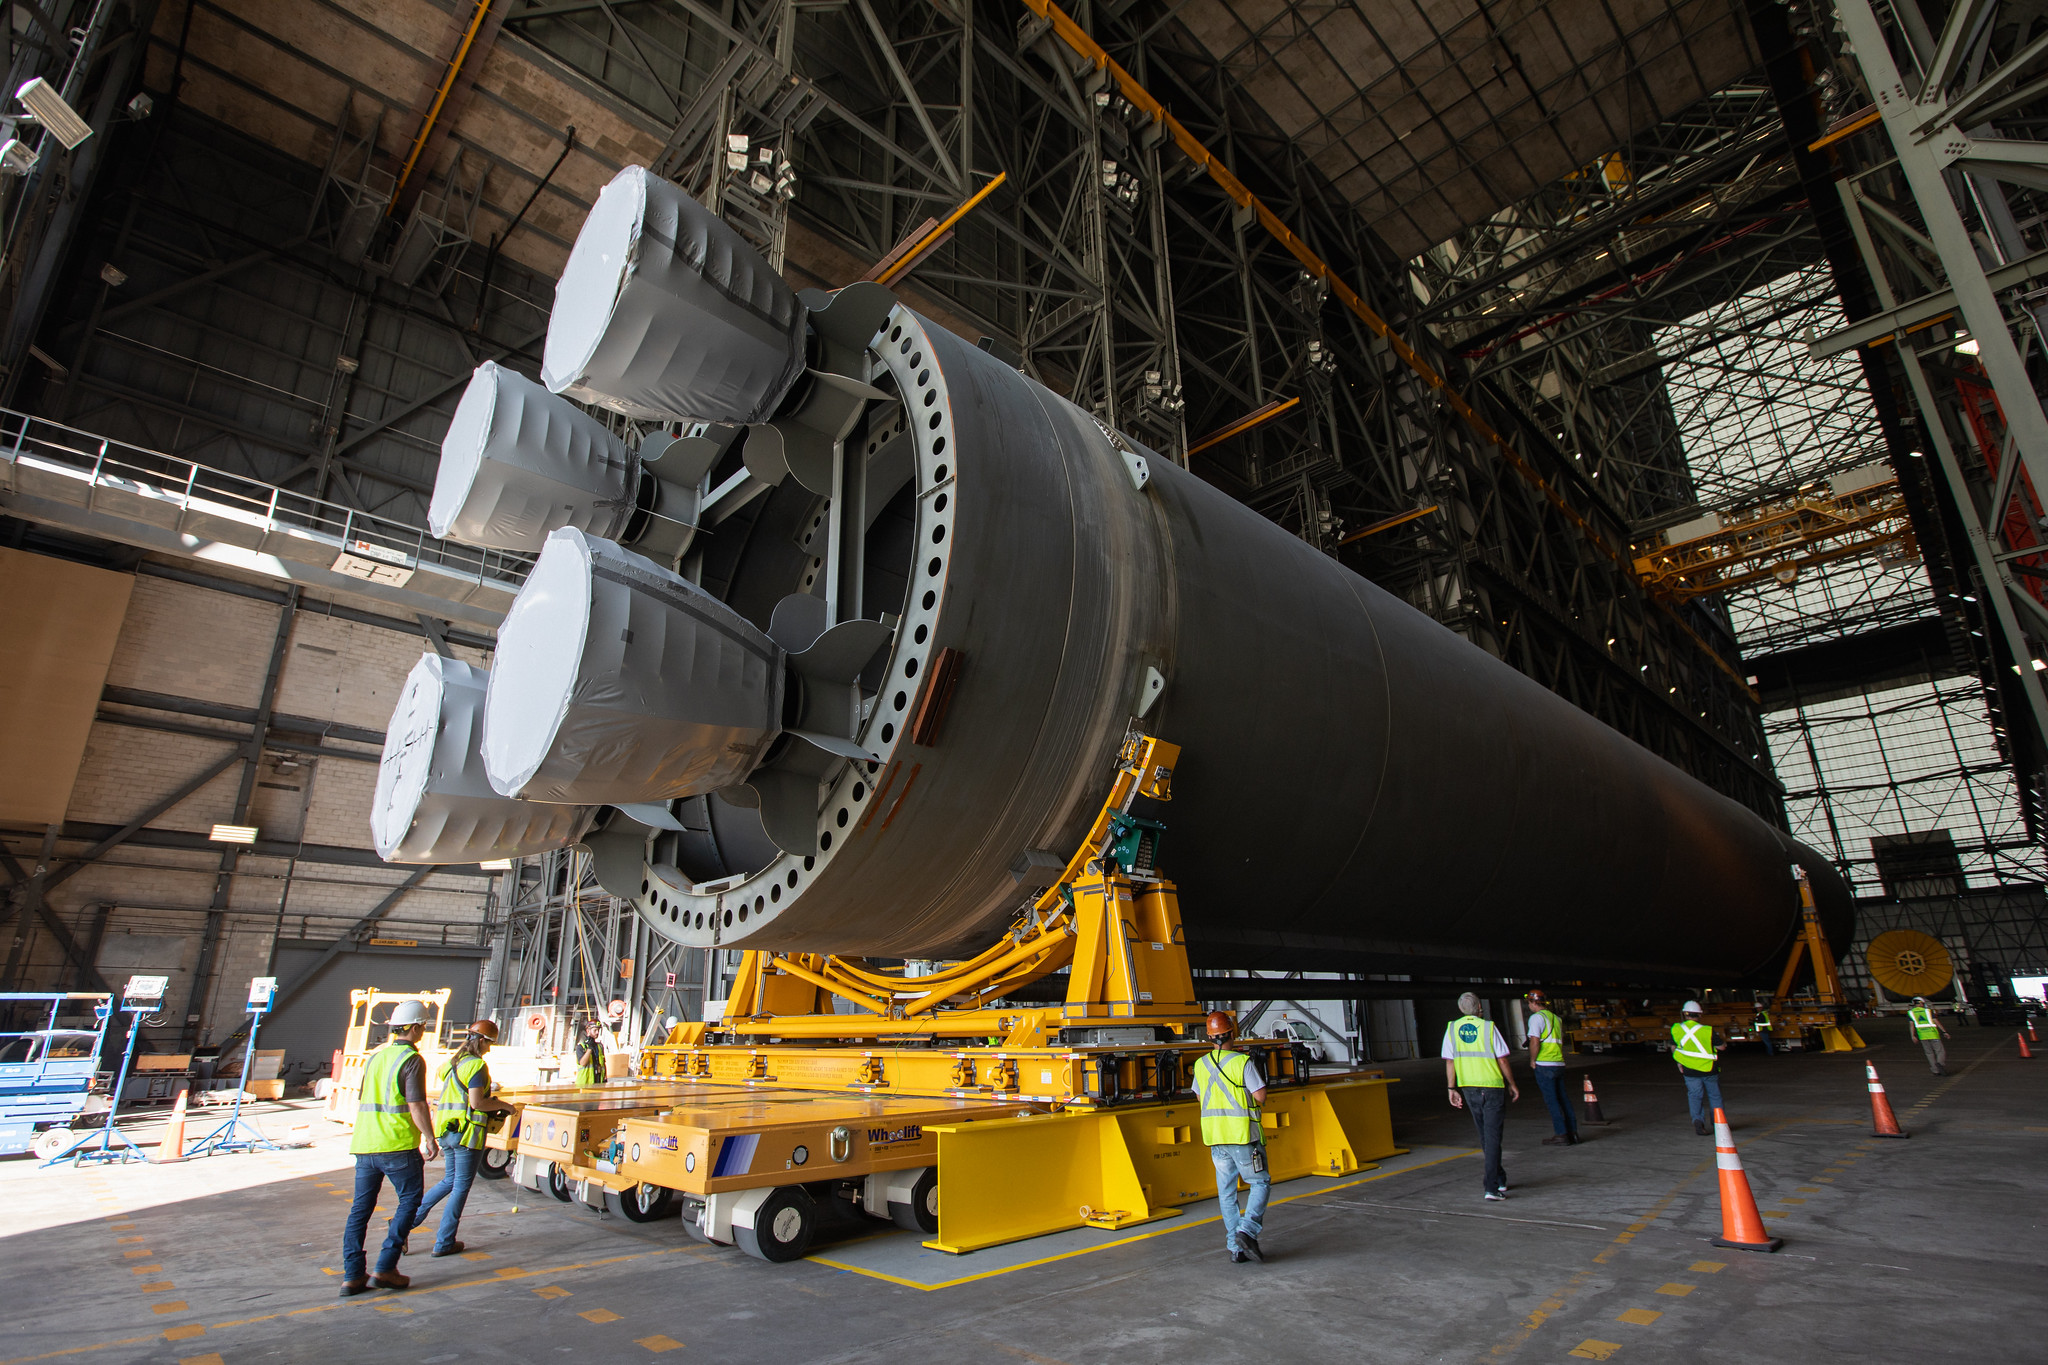 The core stage pathfinder arrived in NASA's Pegasus Barge at Kennedy’s Launch Complex 39 turn basin wharf on Sept. 27, 2019.